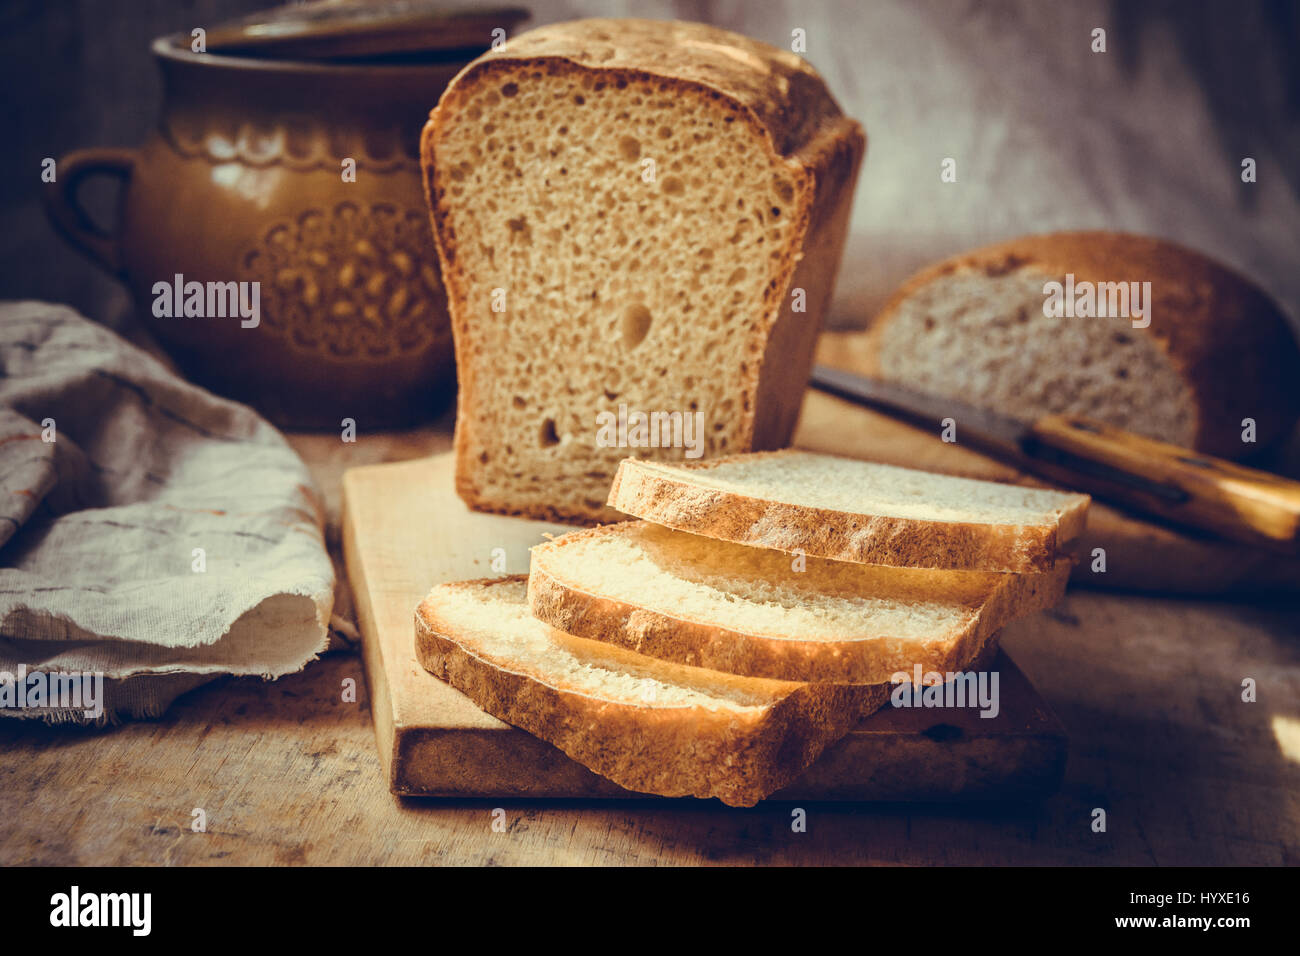 Sourdough bread loaf, sliced on old wood cutting board, vintage crockery, linen towel, authentic rural style, still life, toned Stock Photo